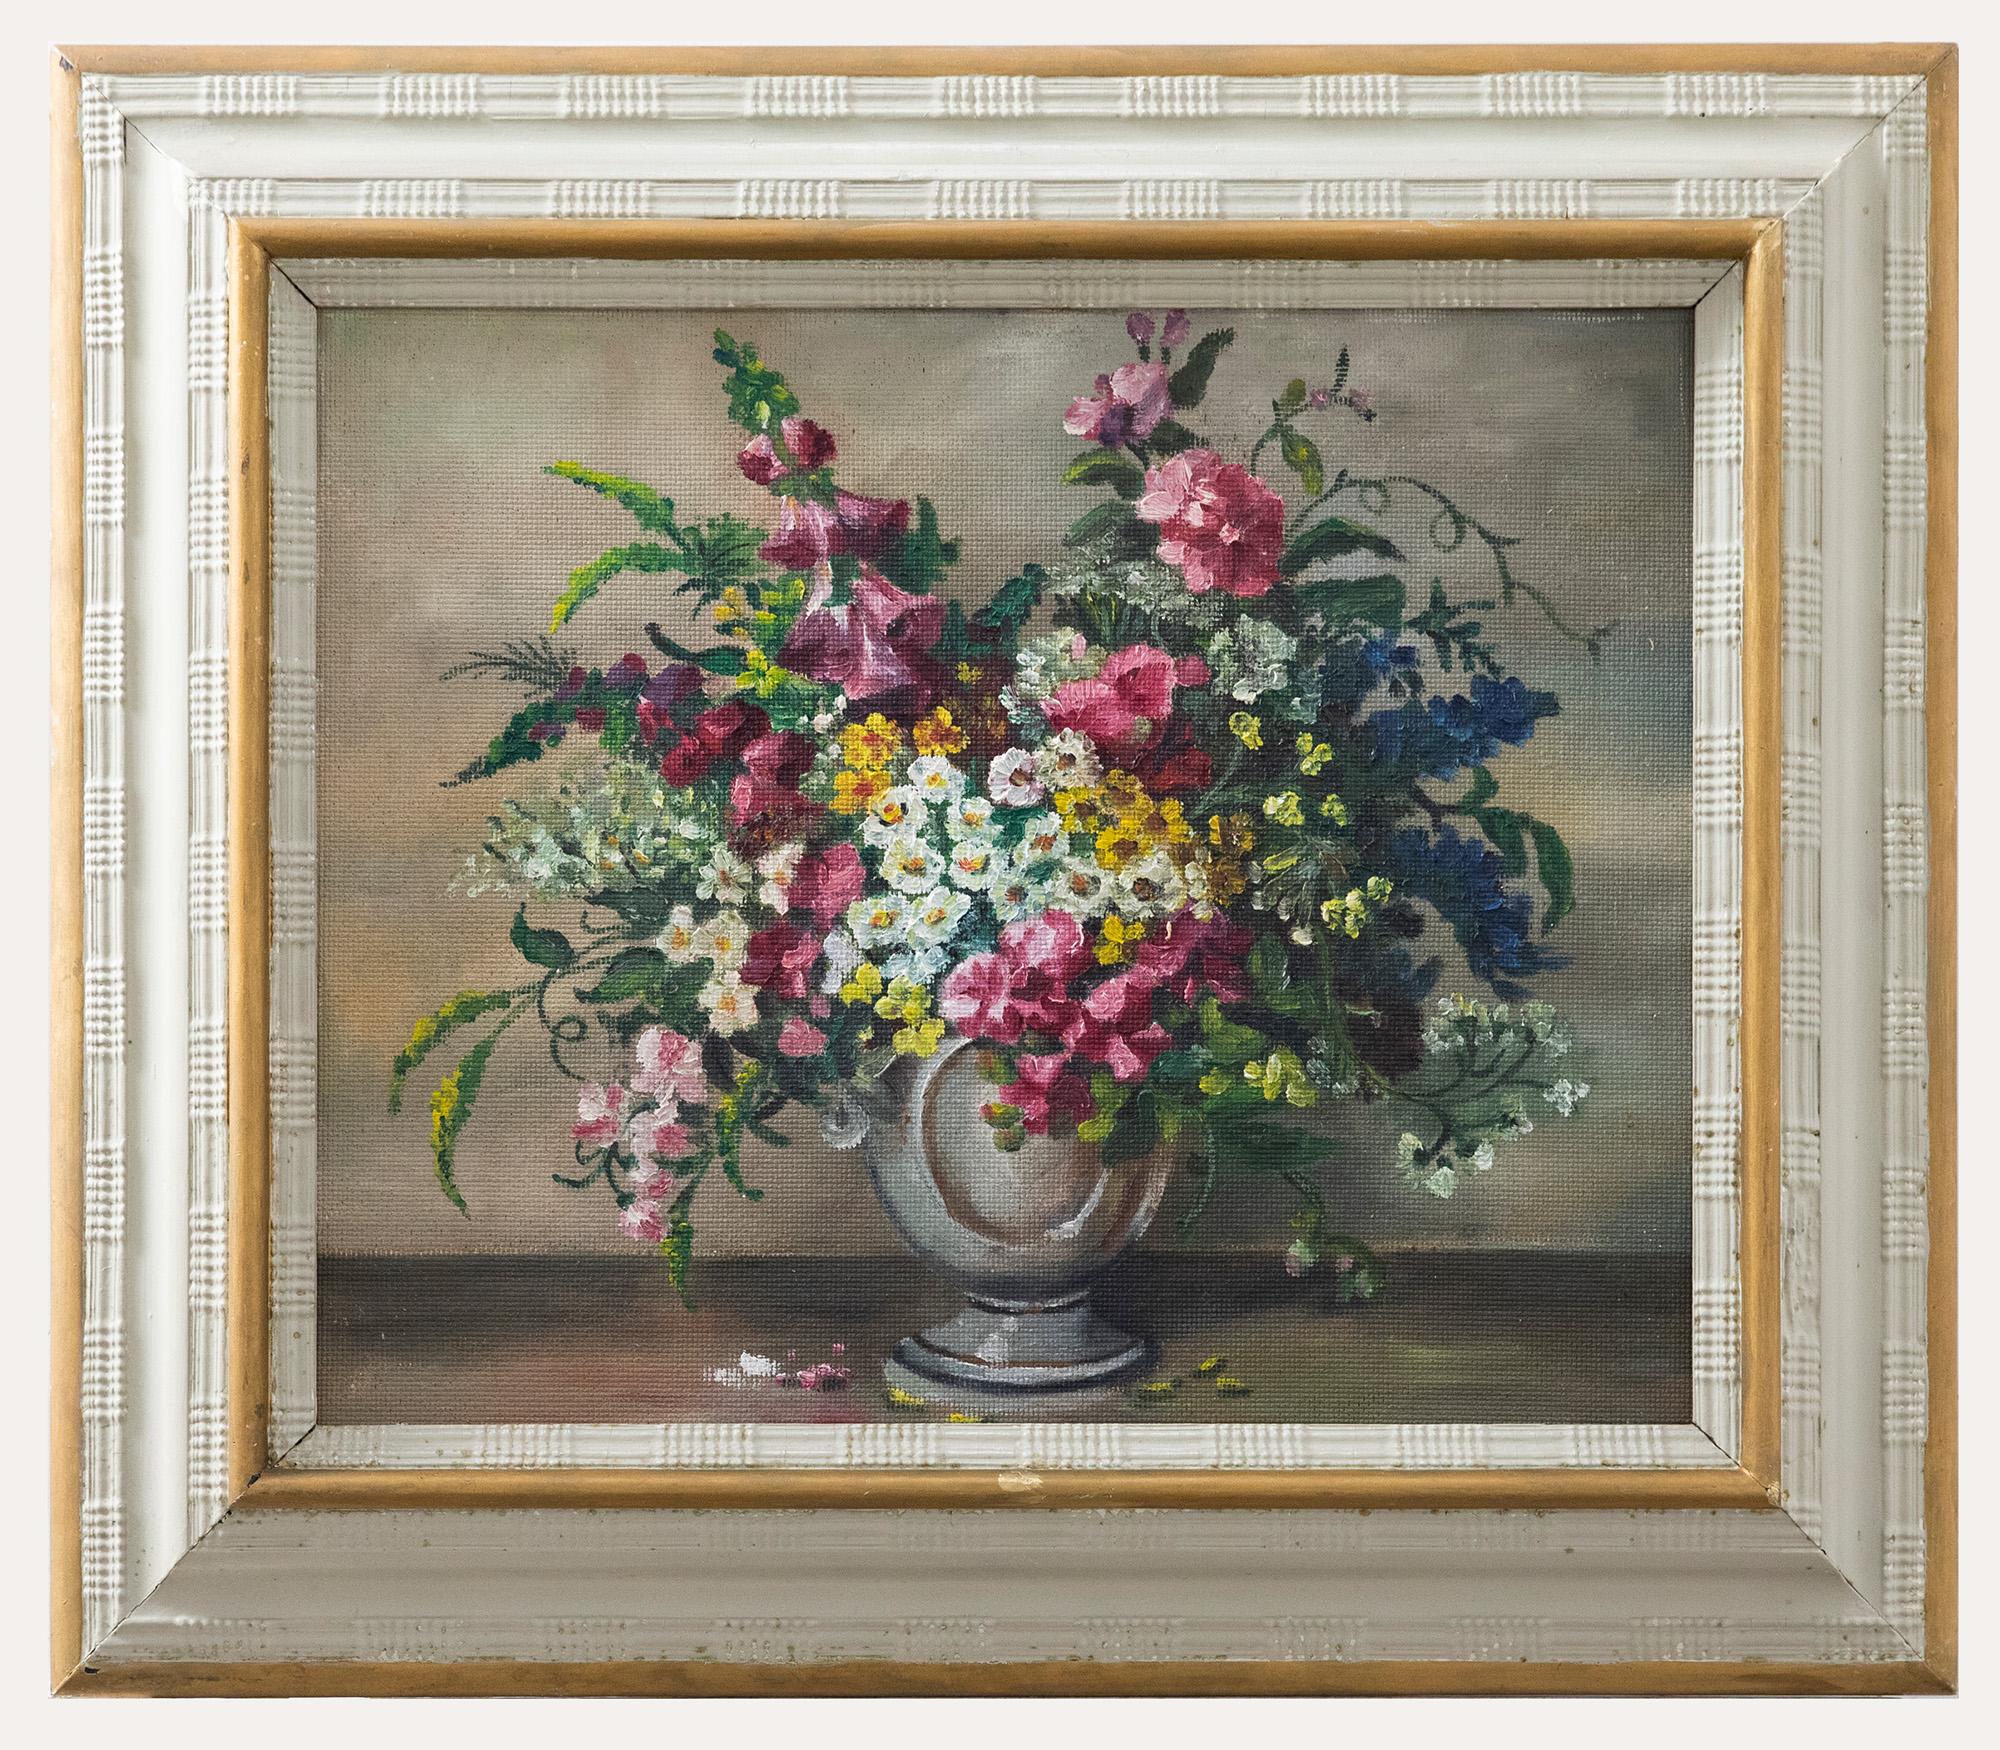 A charming still life study depicting a vase stuffed with foxgloves, roses and gladioli. The floral arrangement spills over the edges of the vase filling the composition with their vibrant colours. Unsigned. Presented in a part-gilt frame with